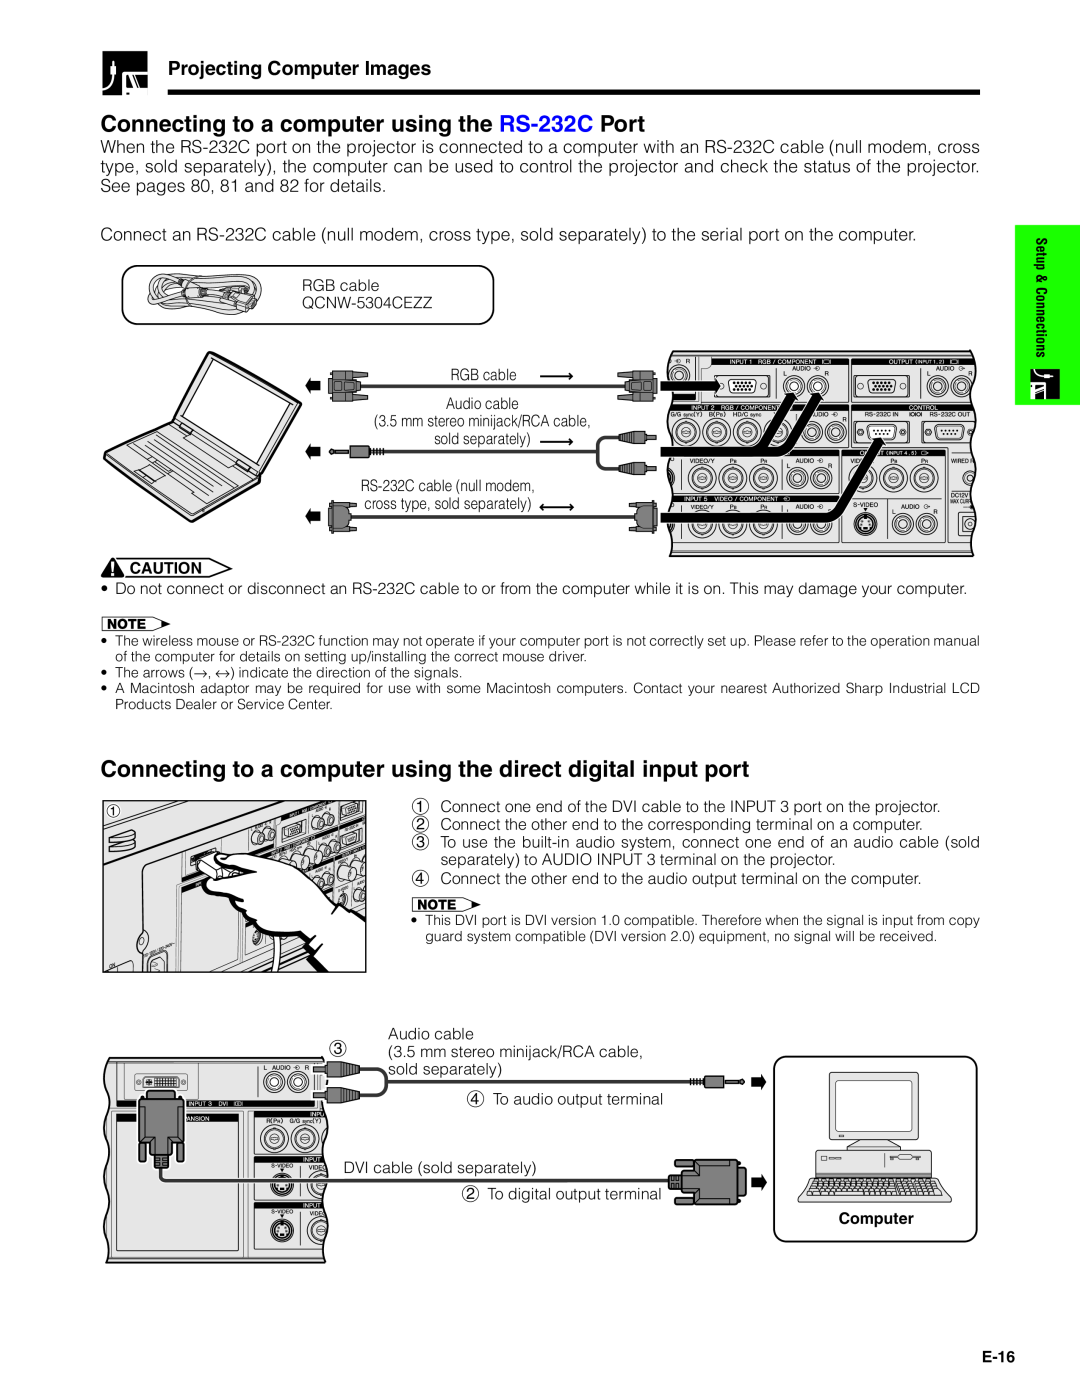 Sharp XG-V10XU operation manual Connecting to a computer using the RS-232C Port, Projecting Computer Images, E-16 